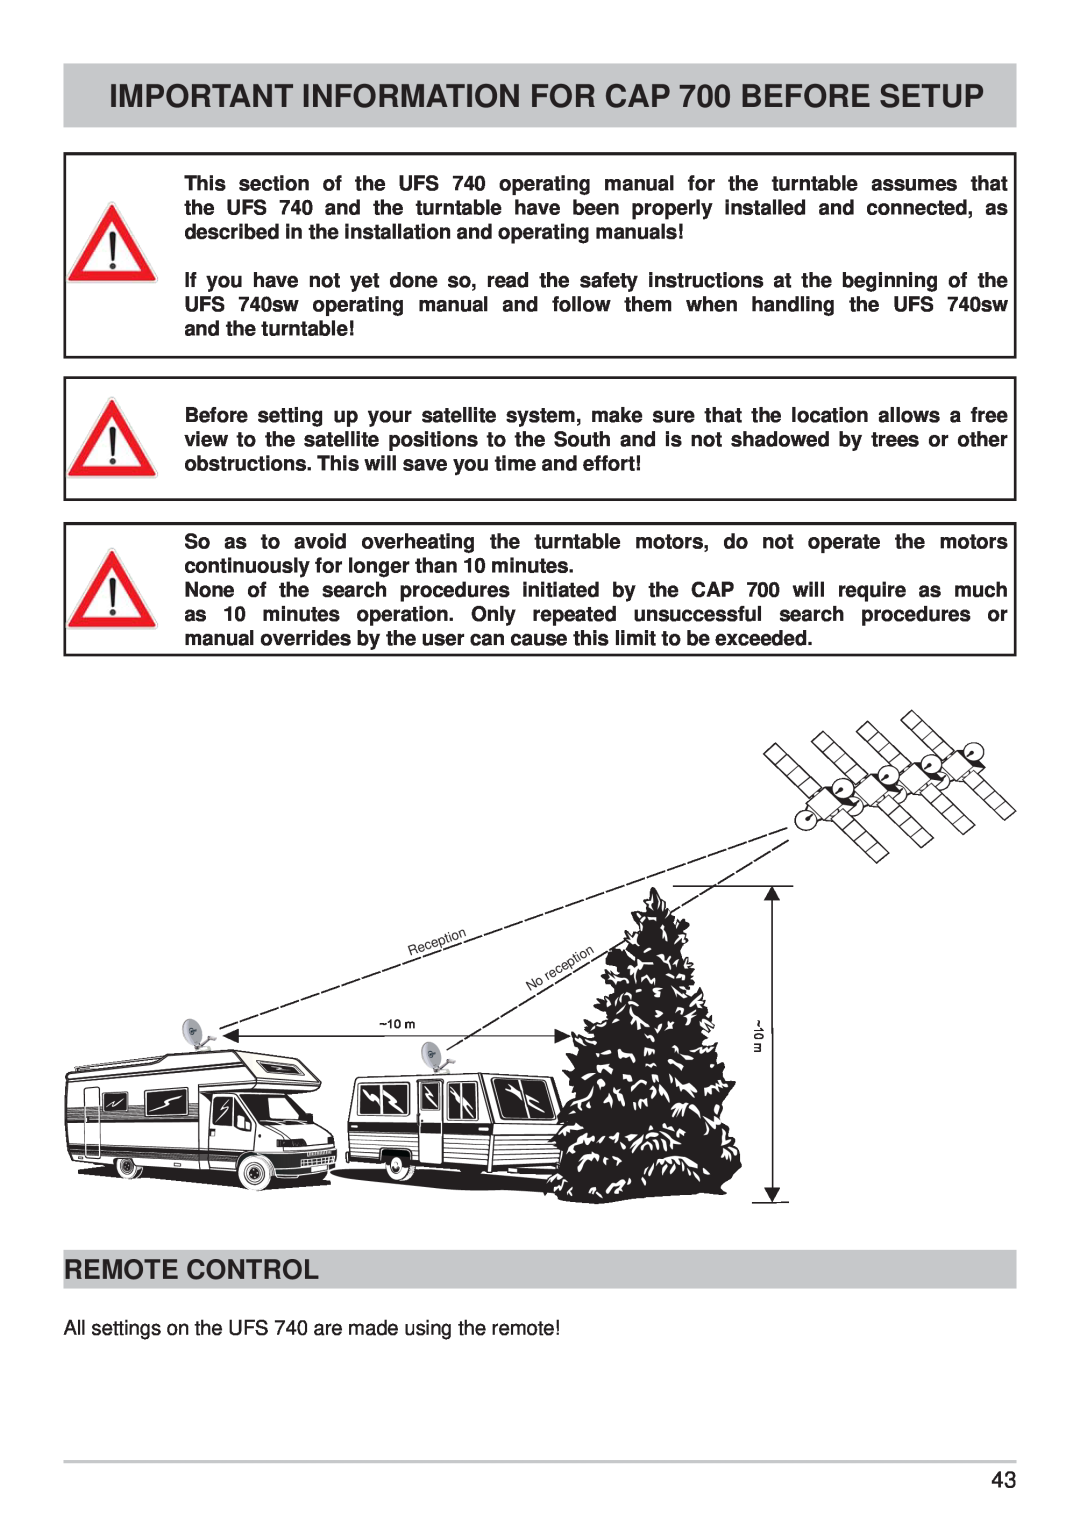 Kathrein manual IMPORTANT INFORMATION FOR CAP 700 BEFORE SETUP, Remote Control 